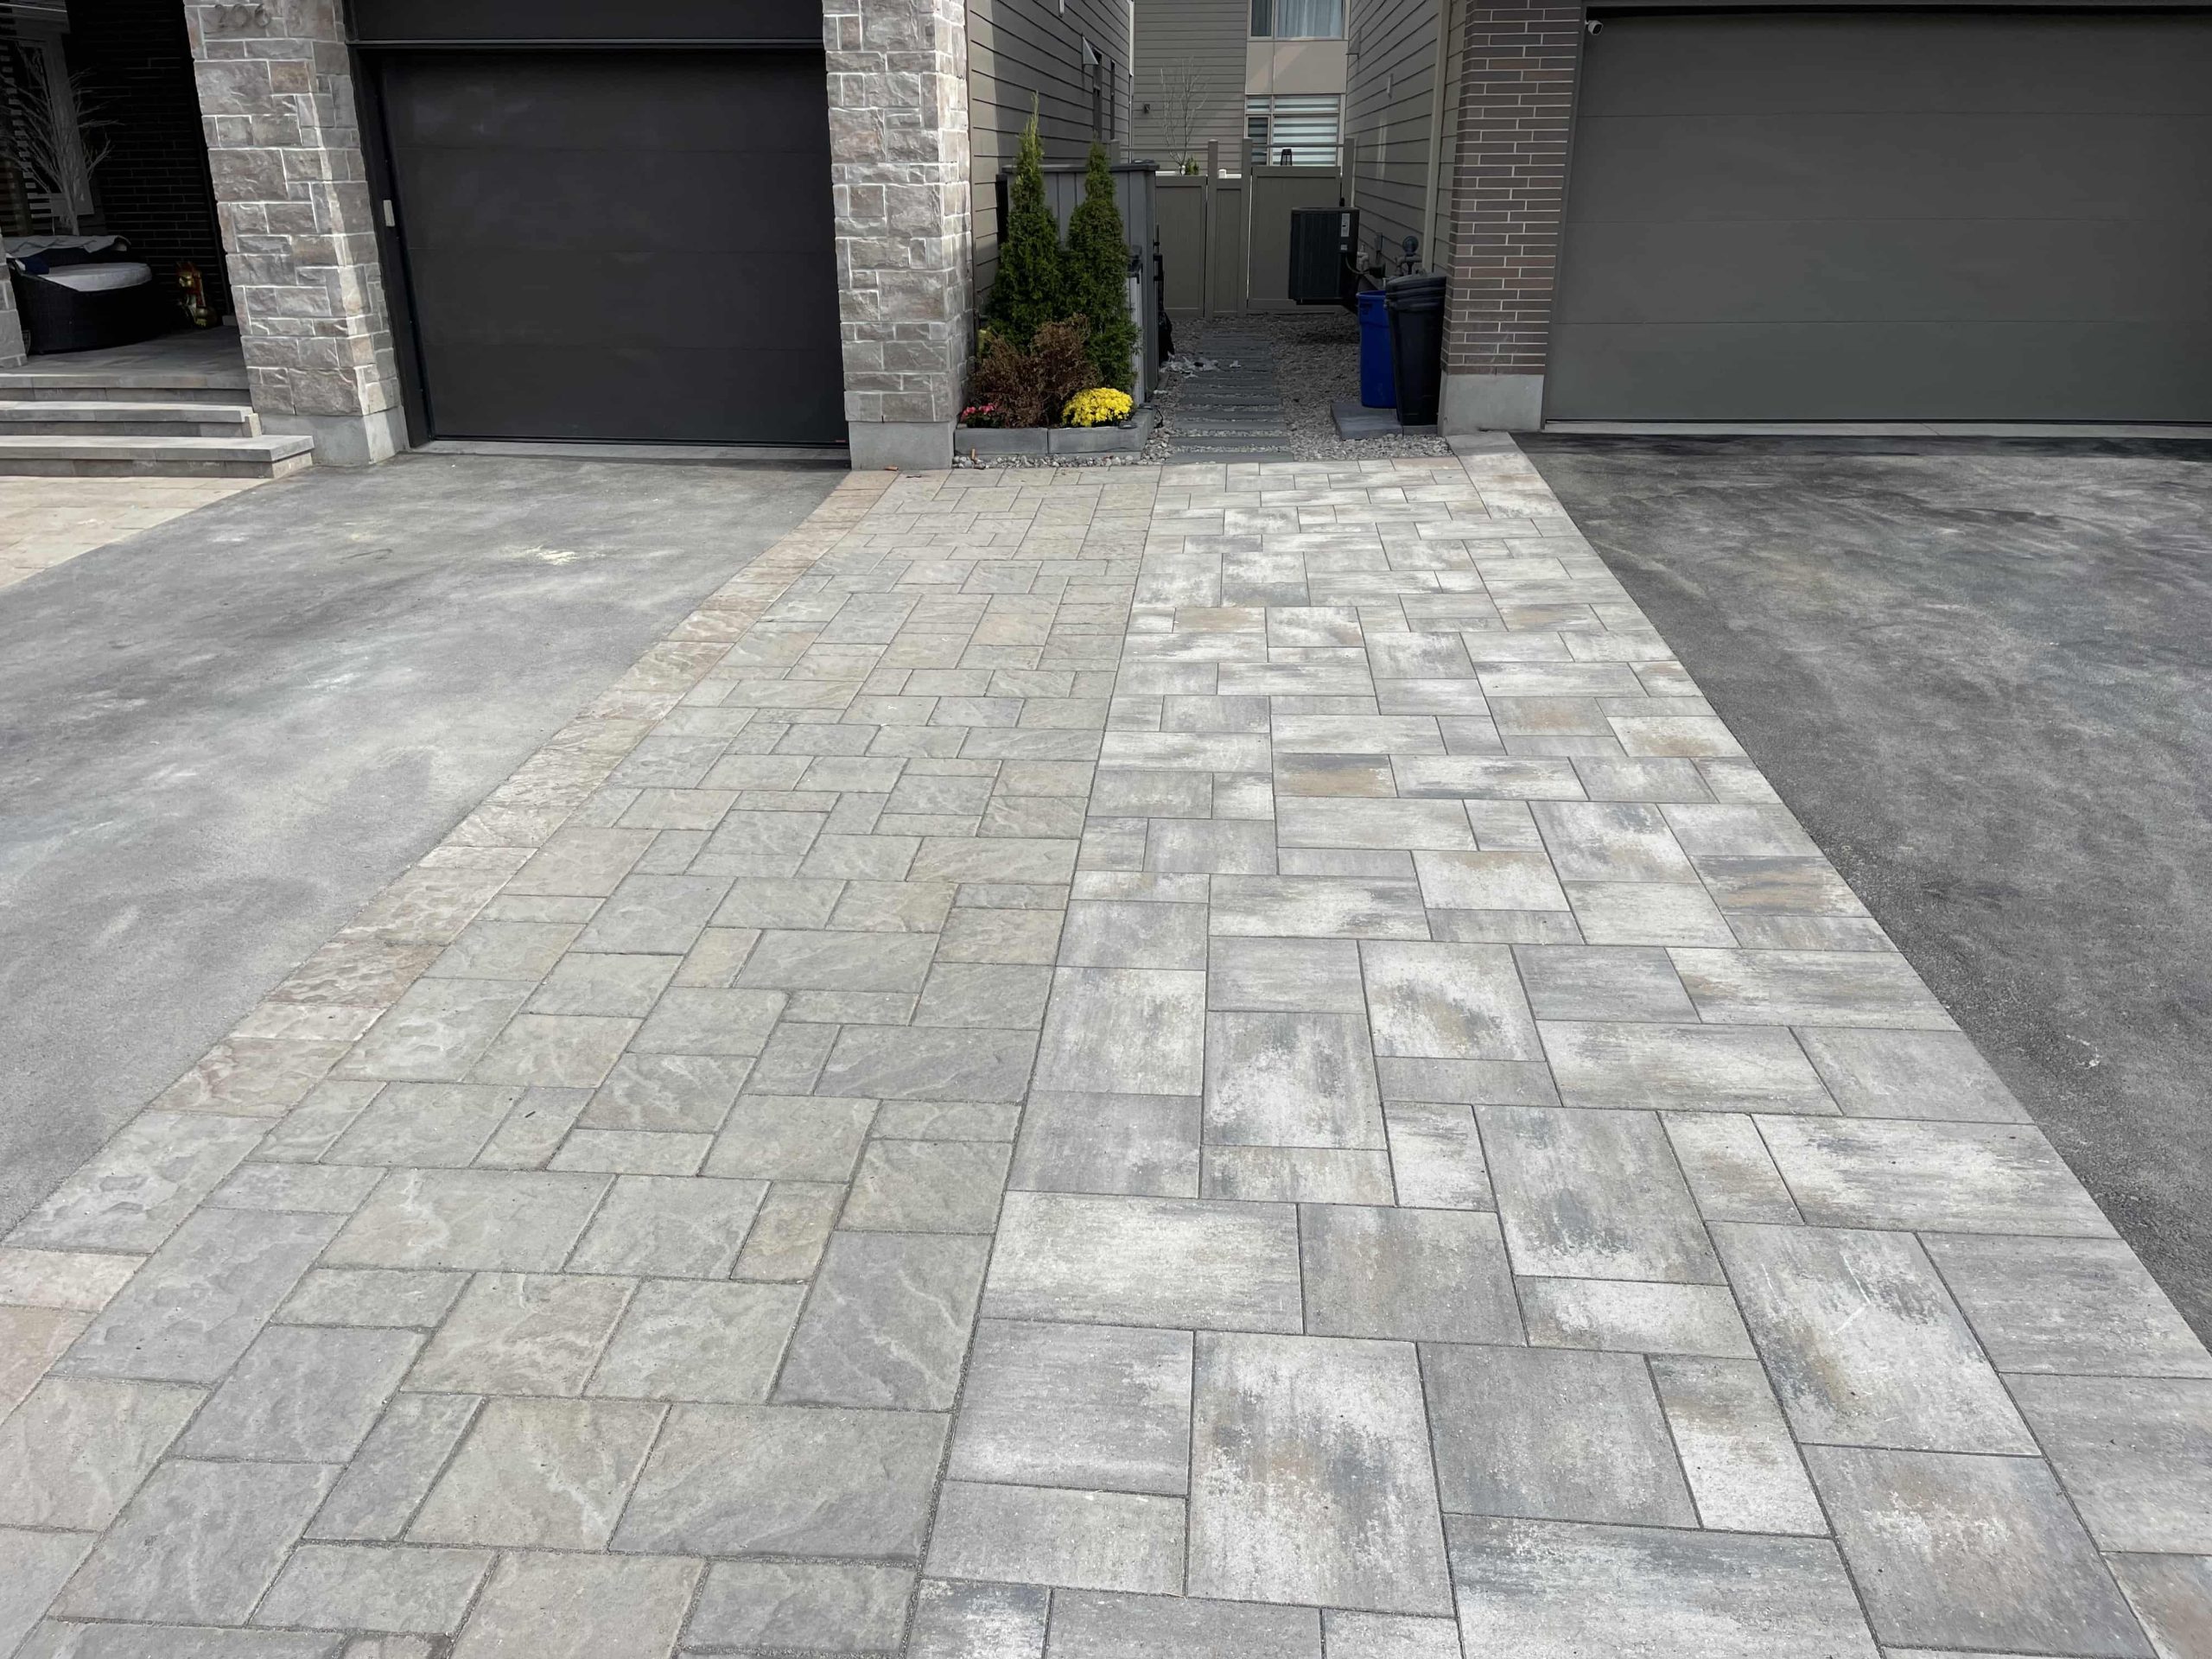 This image shows a driveway at an urban residence with precision-installed interlocking tiles that transition into an asphalt section.